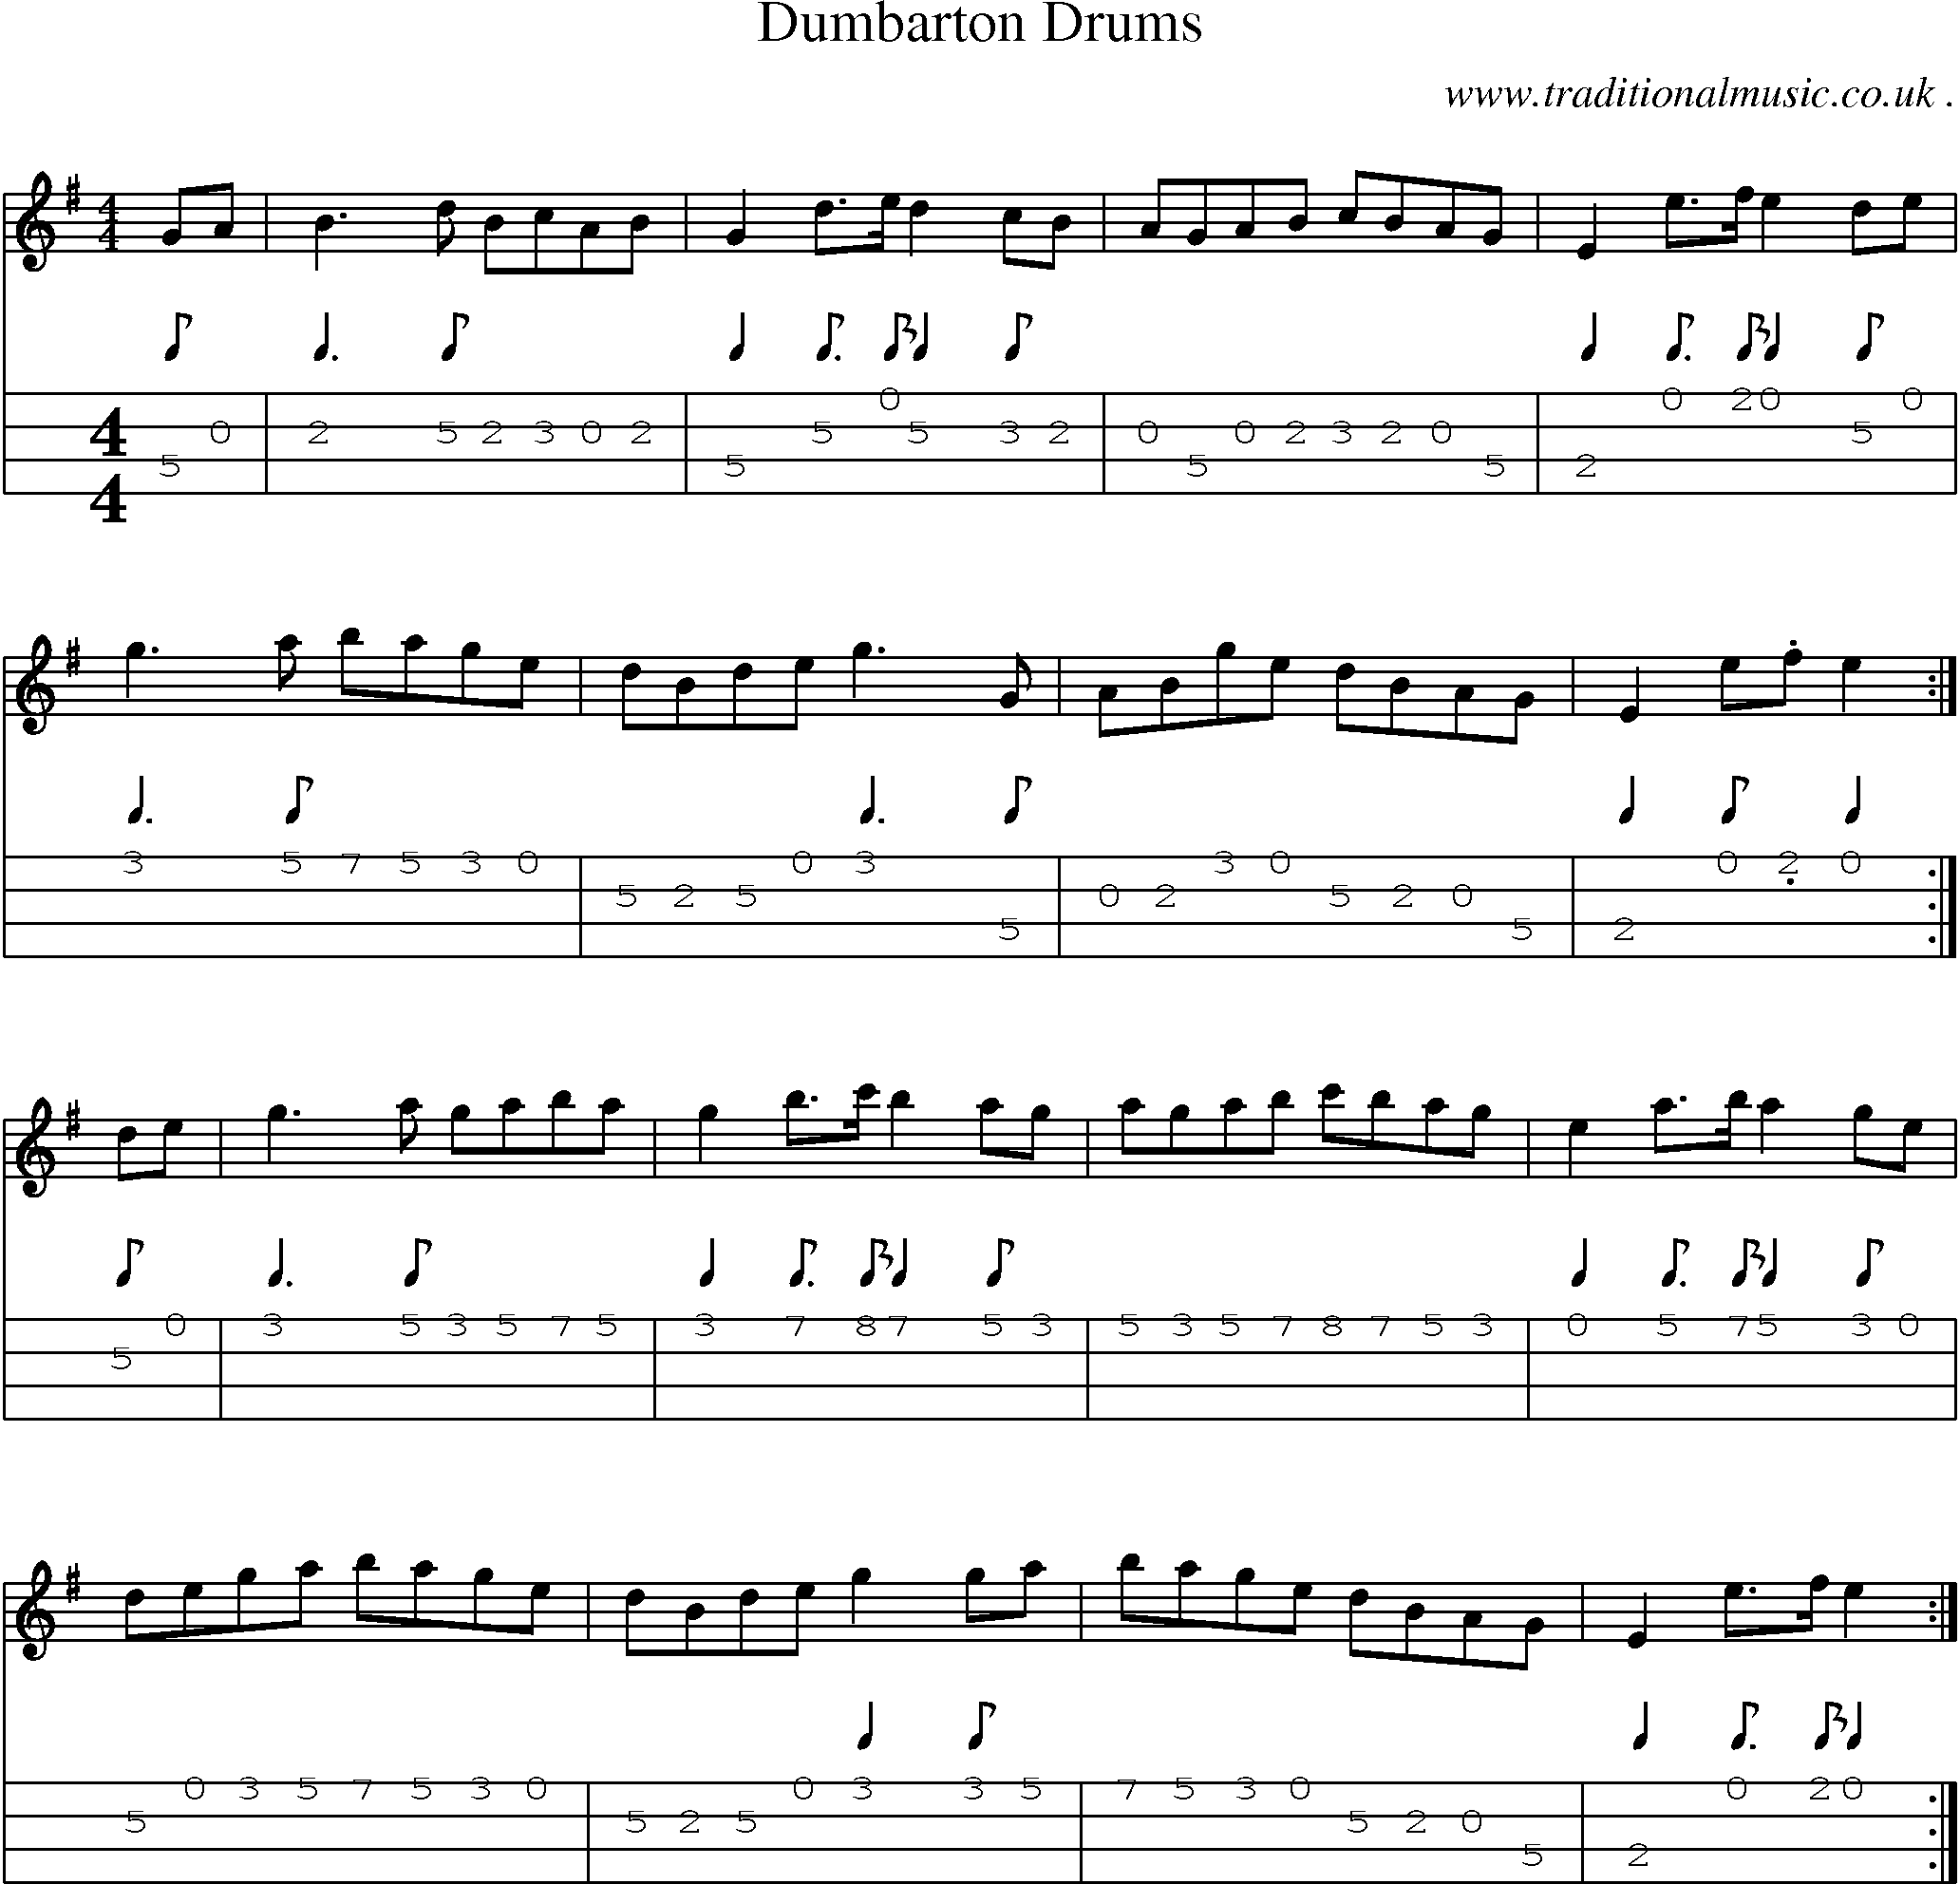 Sheet-music  score, Chords and Mandolin Tabs for Dumbarton Drums